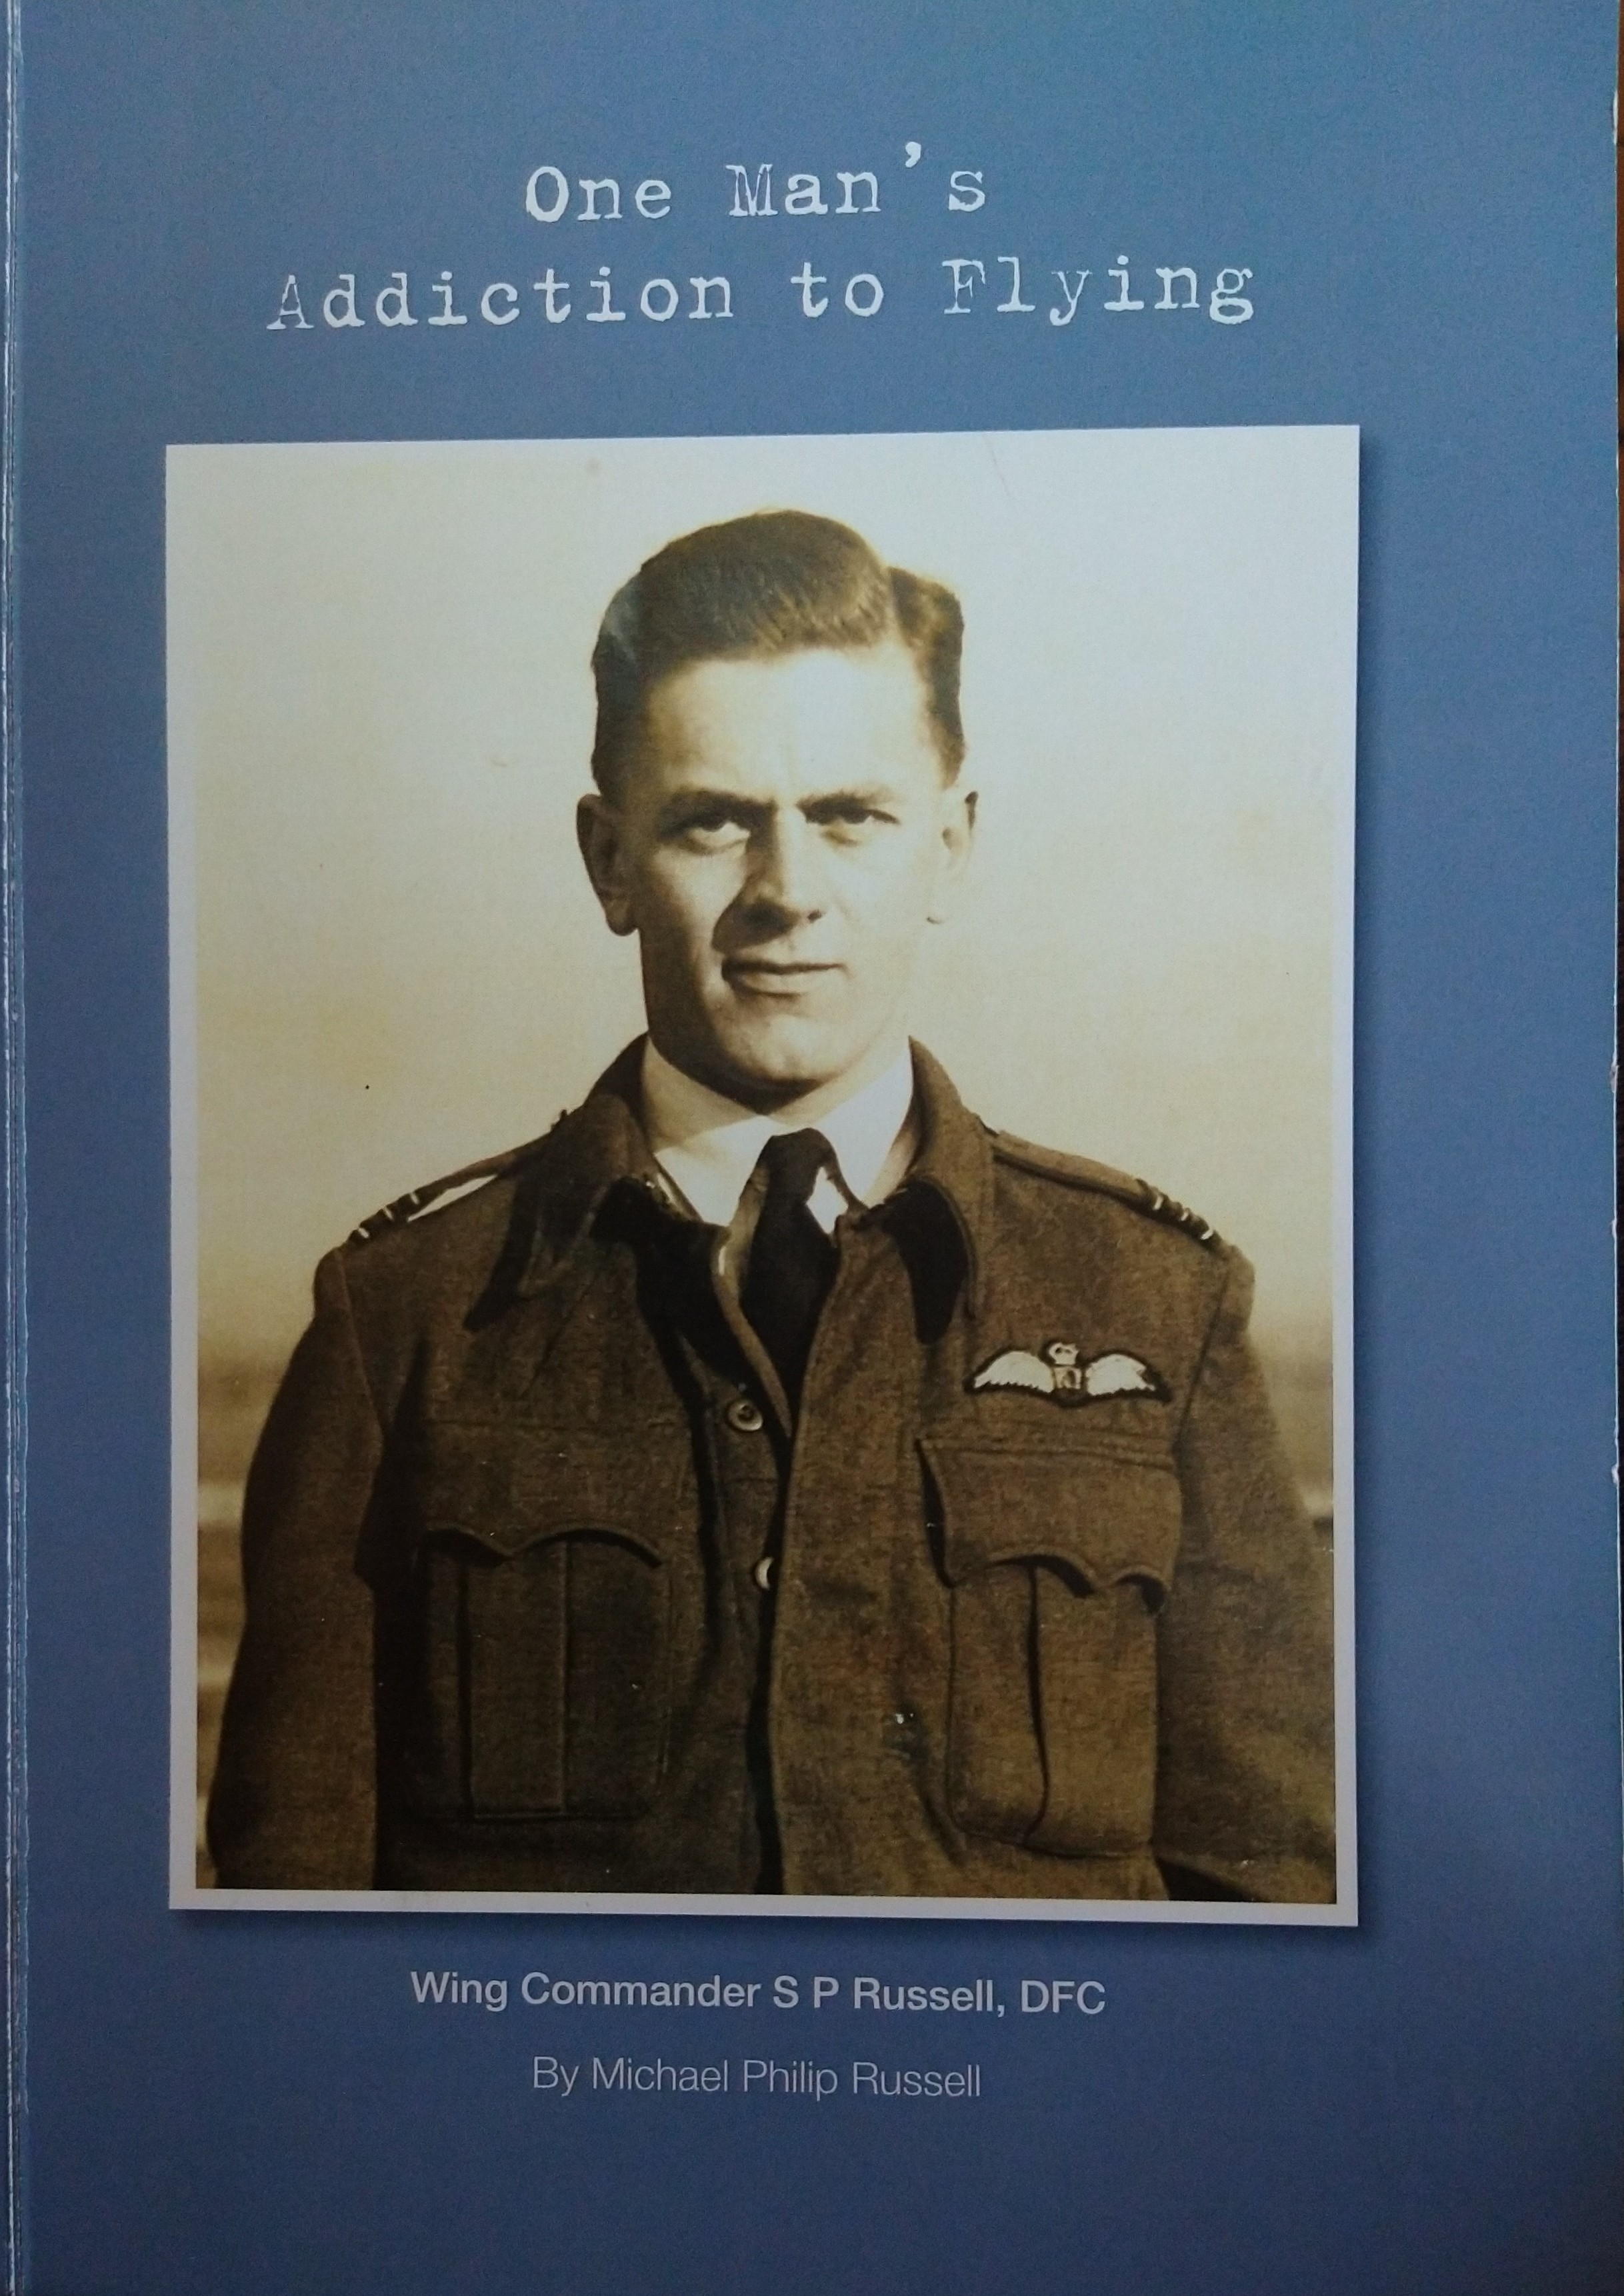 Wing Commander S.P. Russell